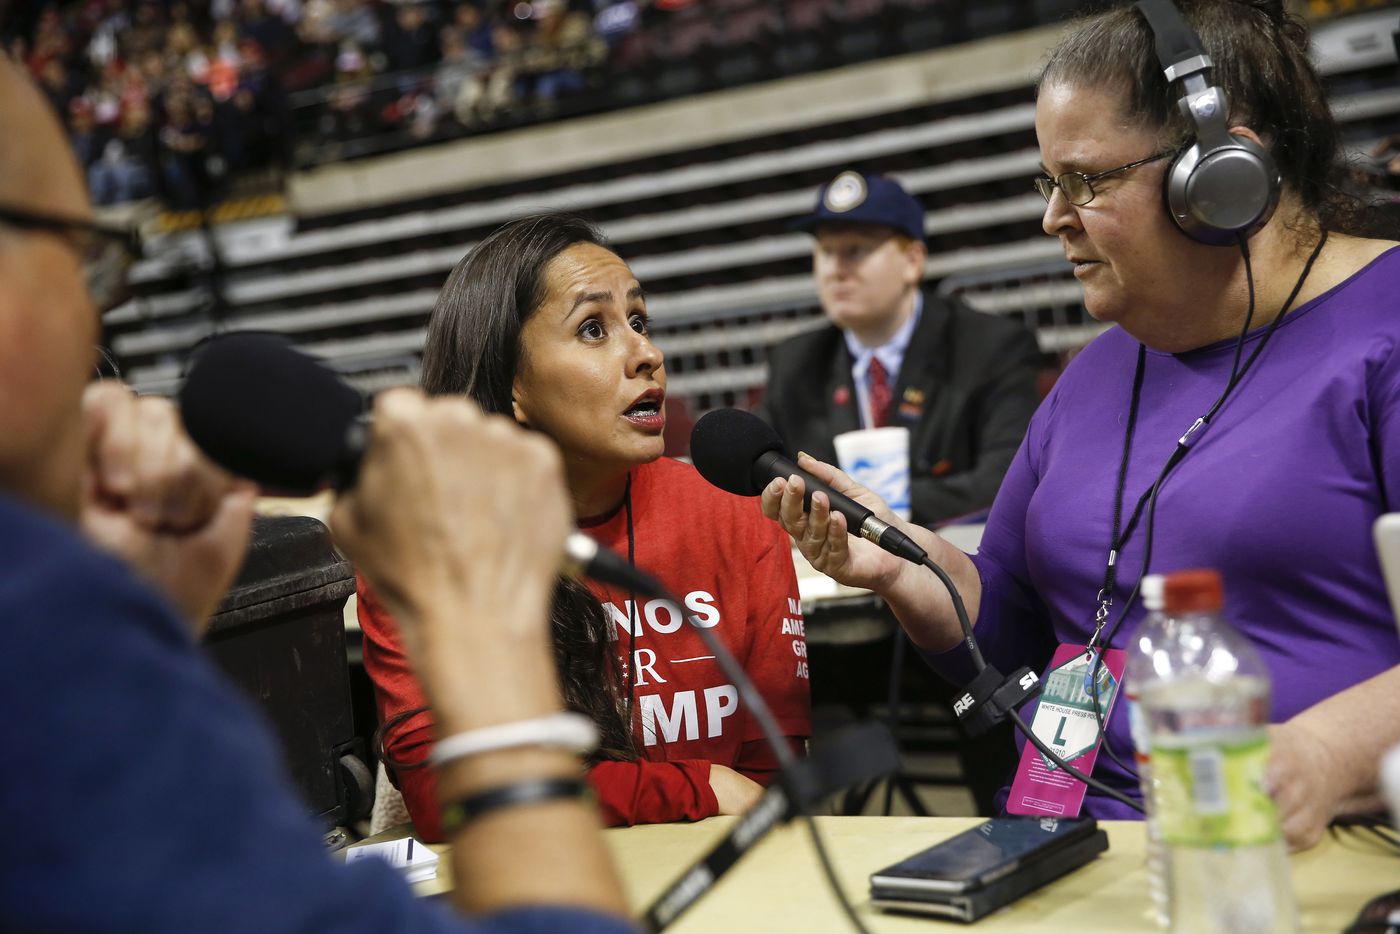 Martha Doss gives an interview to Robert J Wright and Erin McCarty of KEEL 710 AM radio during a rally to reelect President Donald Trump in Bossier City, La.